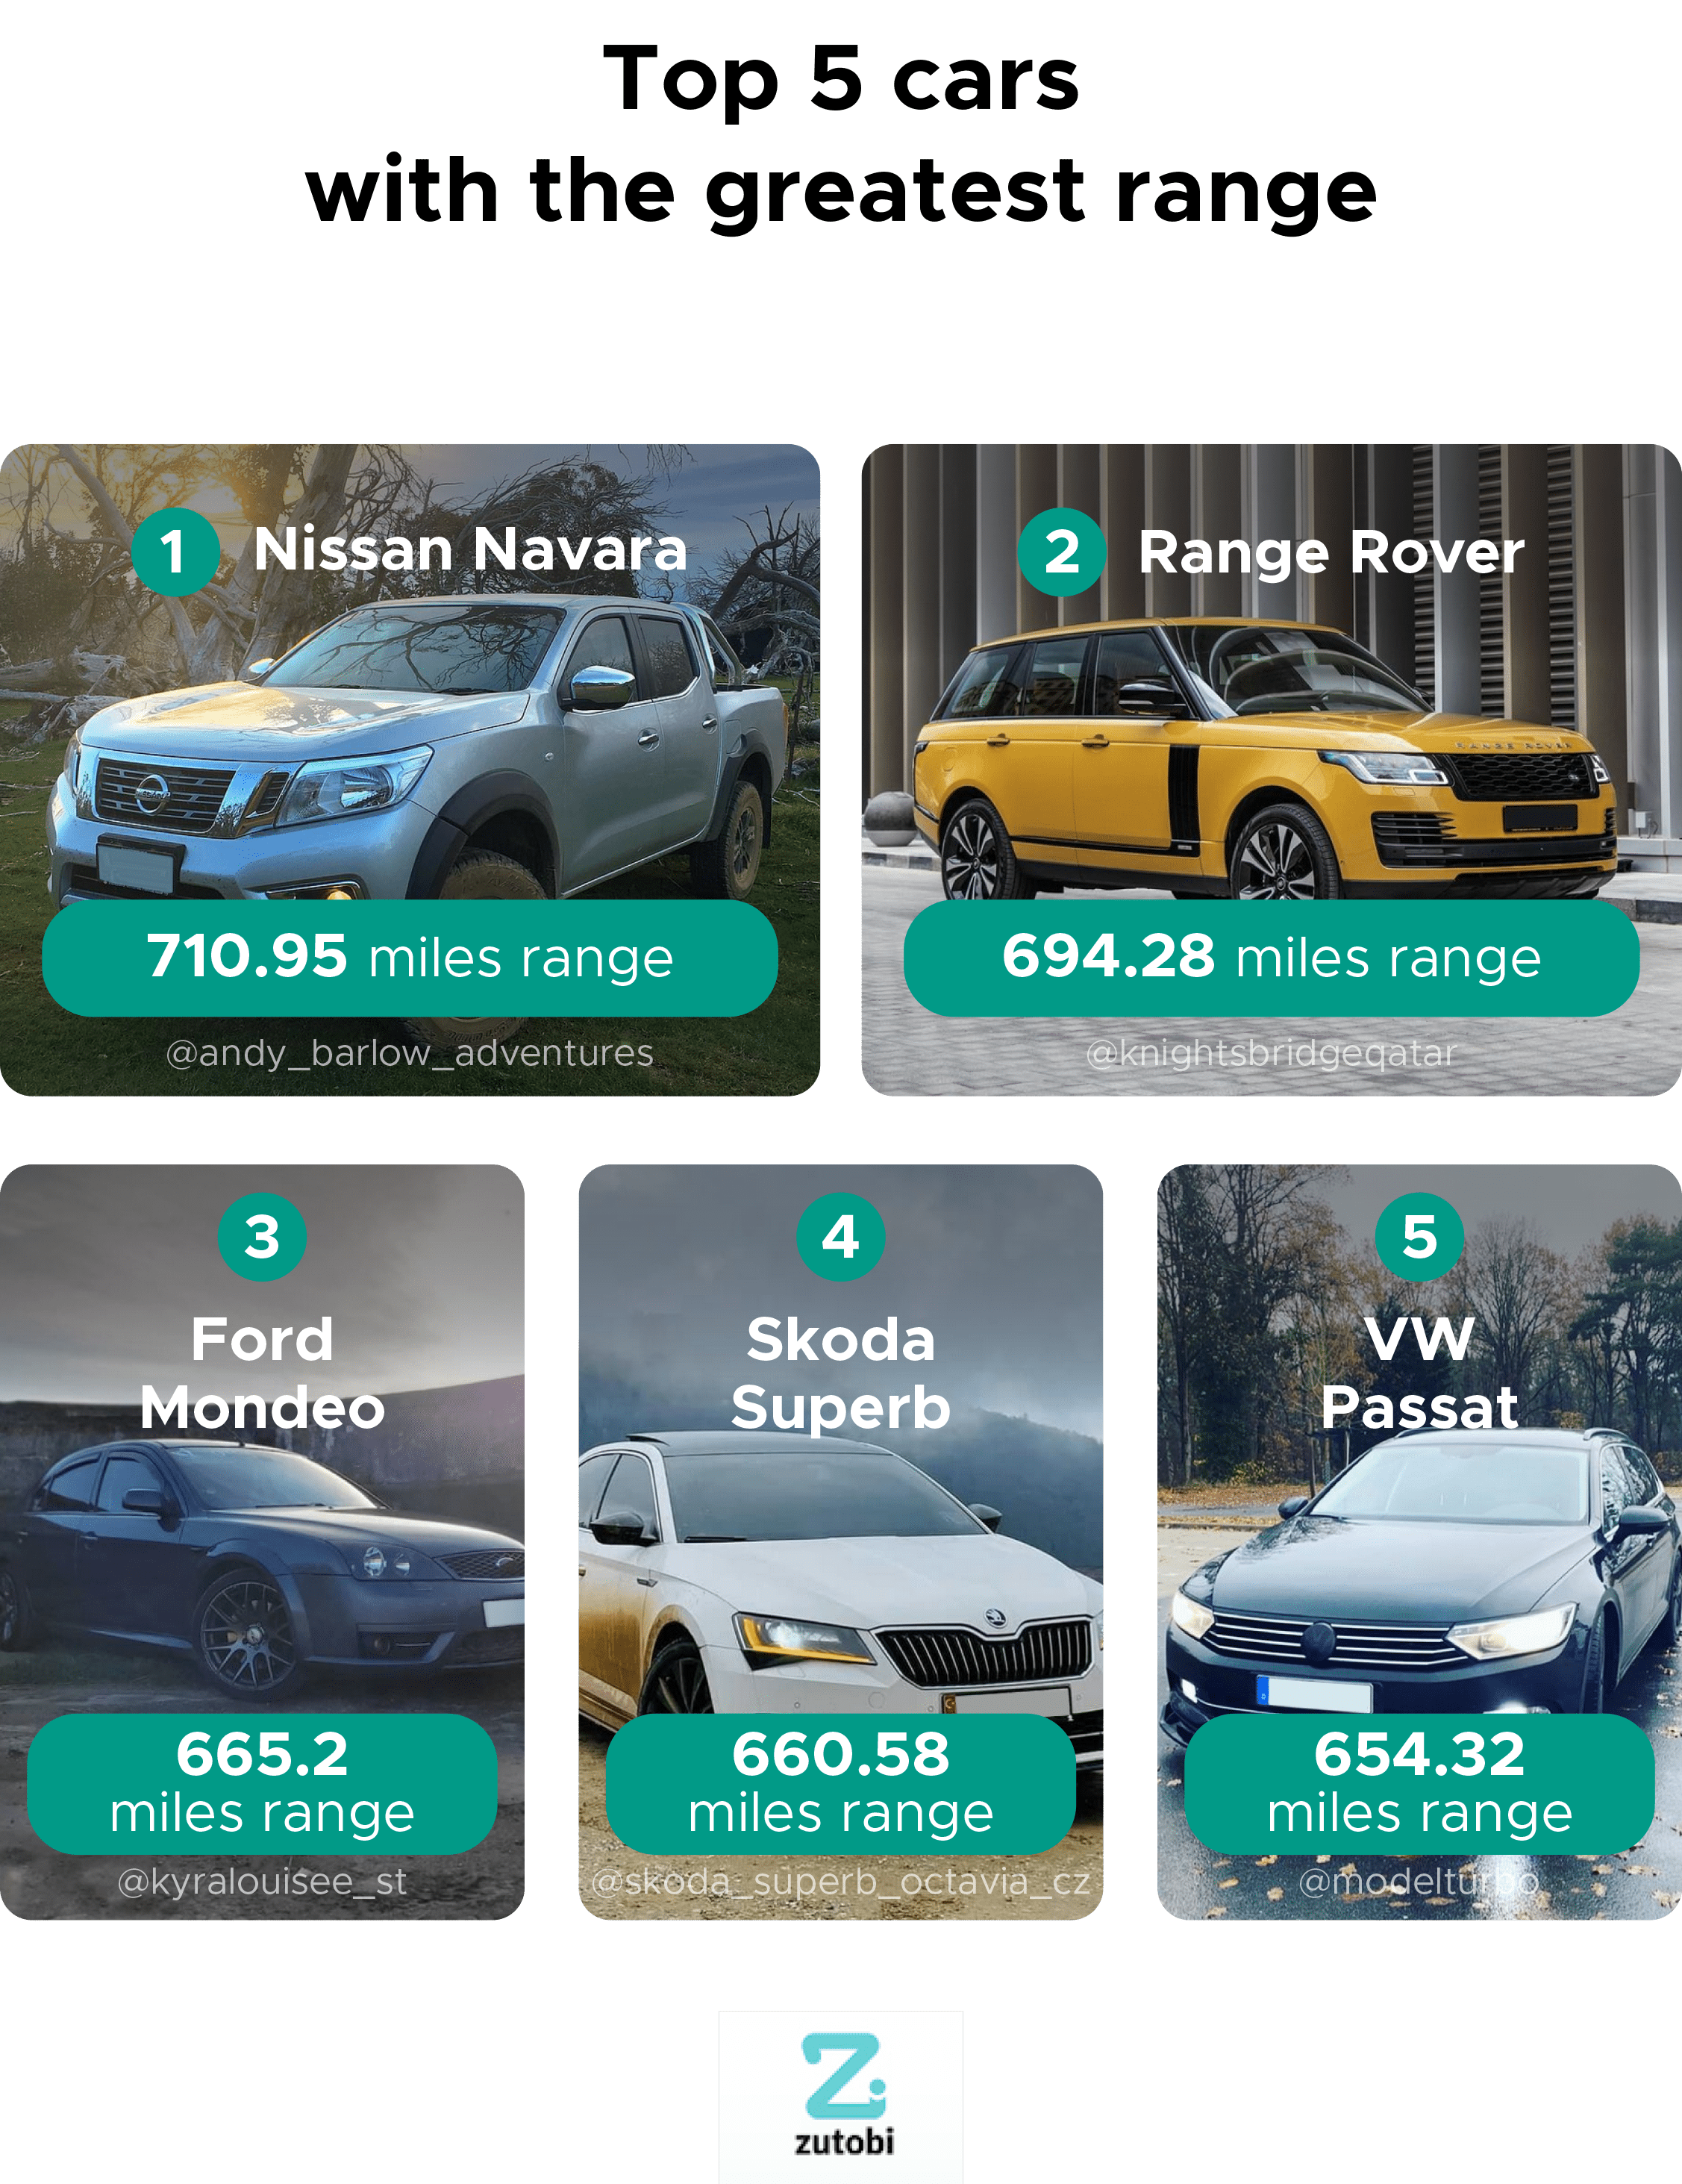 Top 5 cars with the greatest range